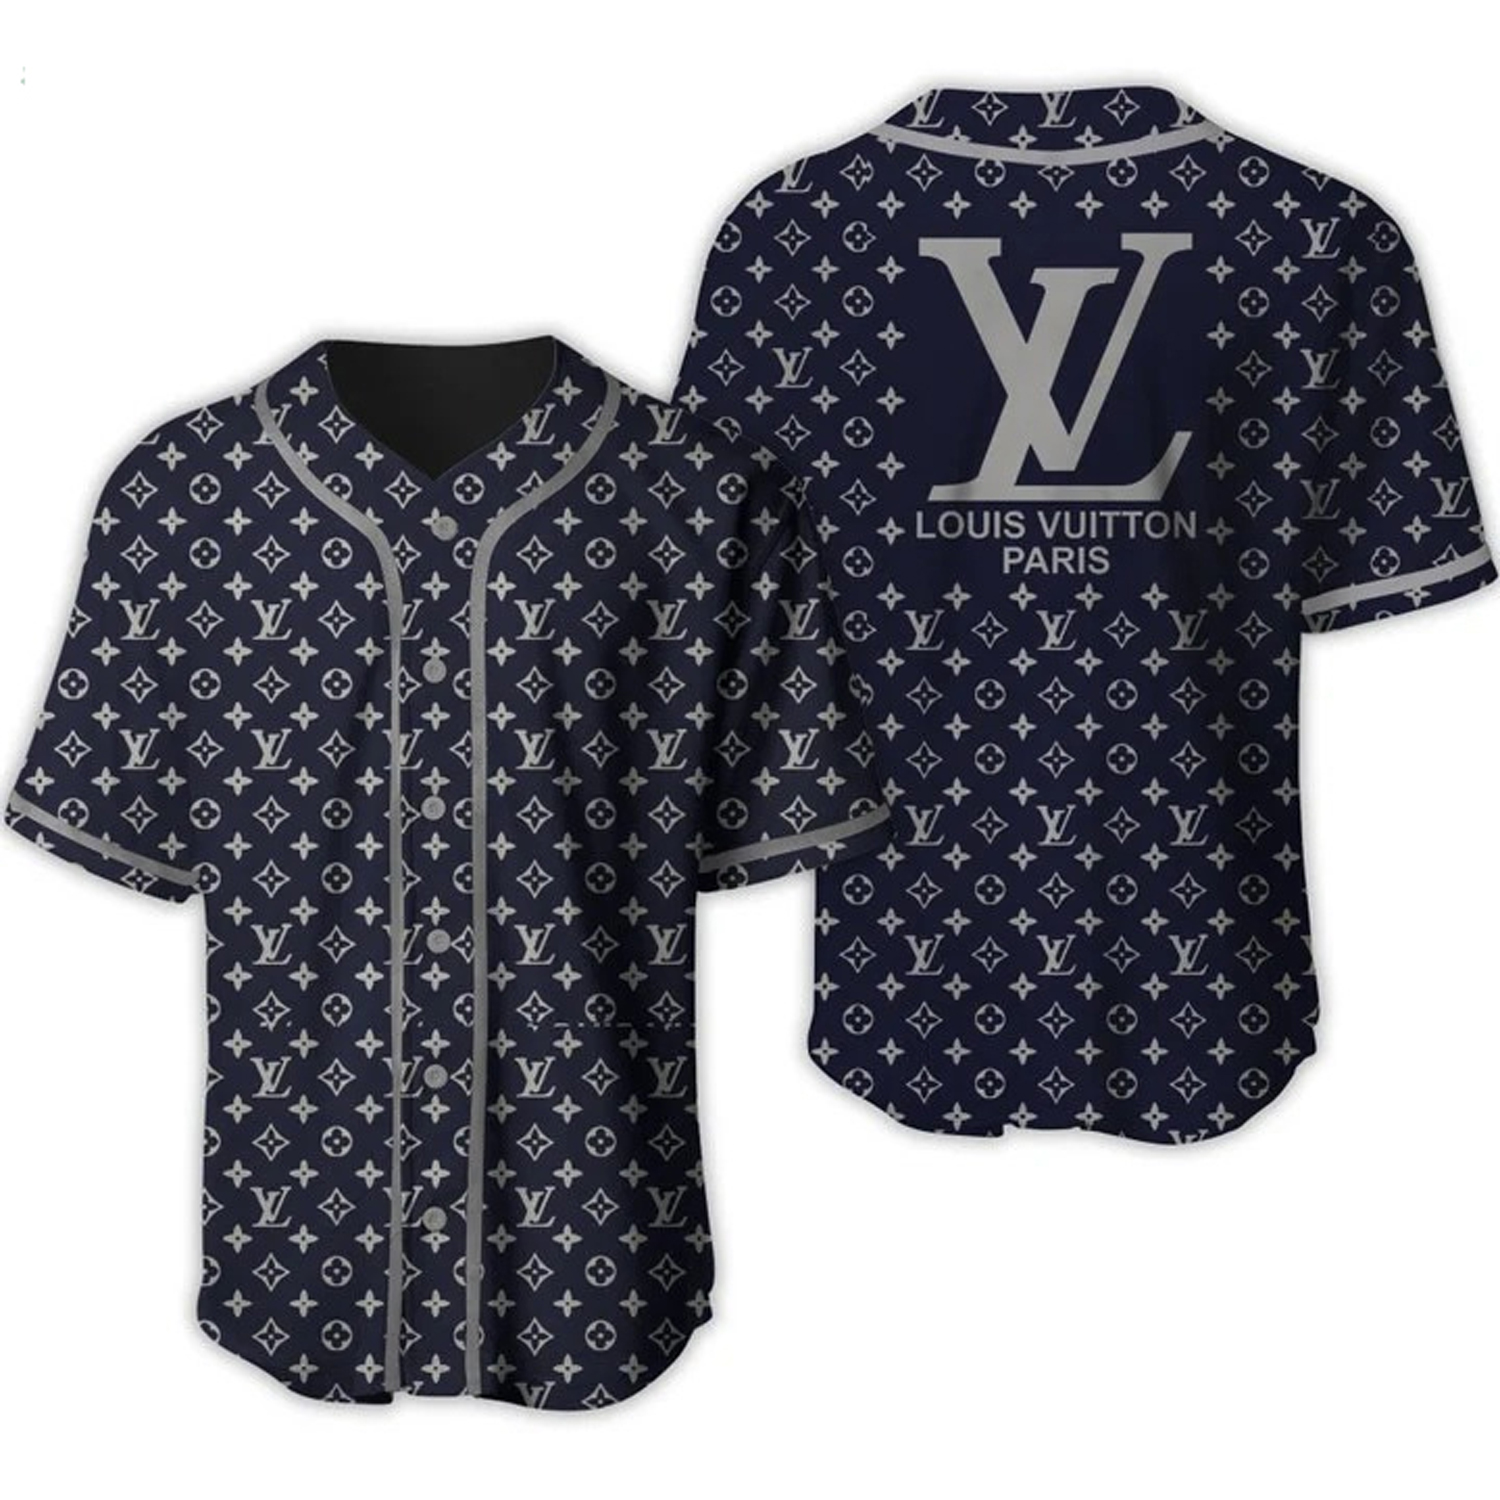 Buy Louis Vuitton Blue Baseball Jersey Shirt Lv Luxury Clothing Clothes ...